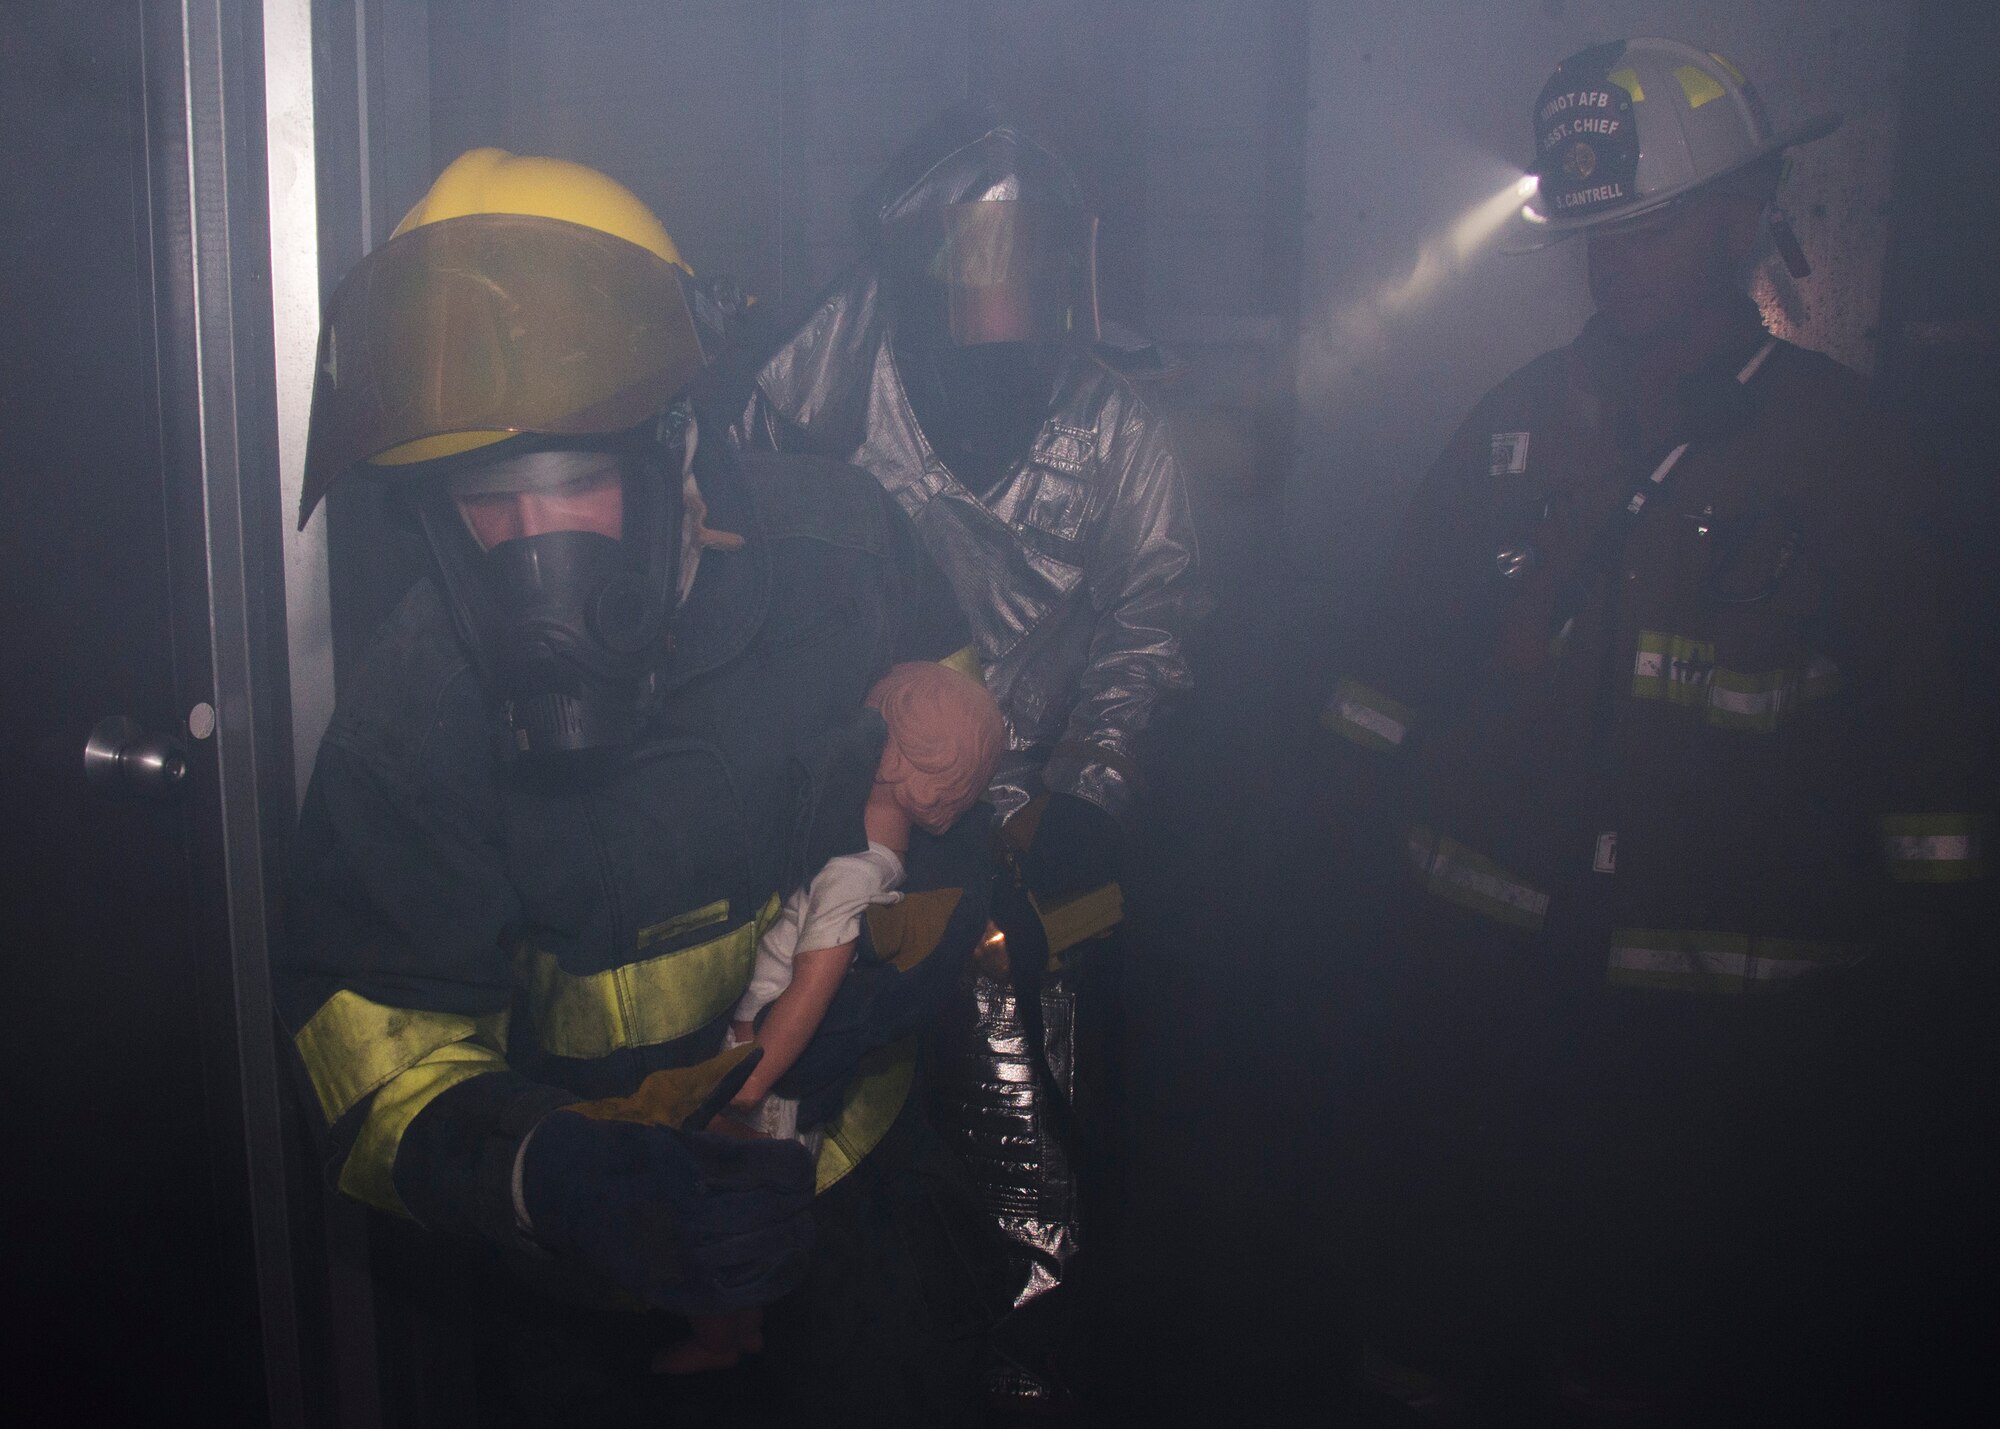 Alex Debowey, a Fire Explorer from Post #9463 in Minot, N.D., rushes a victim to safety during a simulated fire rescue mission at Minot Air Force Base, April 30, 2017. During the mission, the Minot Boy Scouts of America and Fire Explorers forced a door open, stopped a simulated fire, rescued victims and ventilated the area while following basic firefighting procedures. (U.S. Air Force photo/Airman 1st Class Alyssa M. Akers)